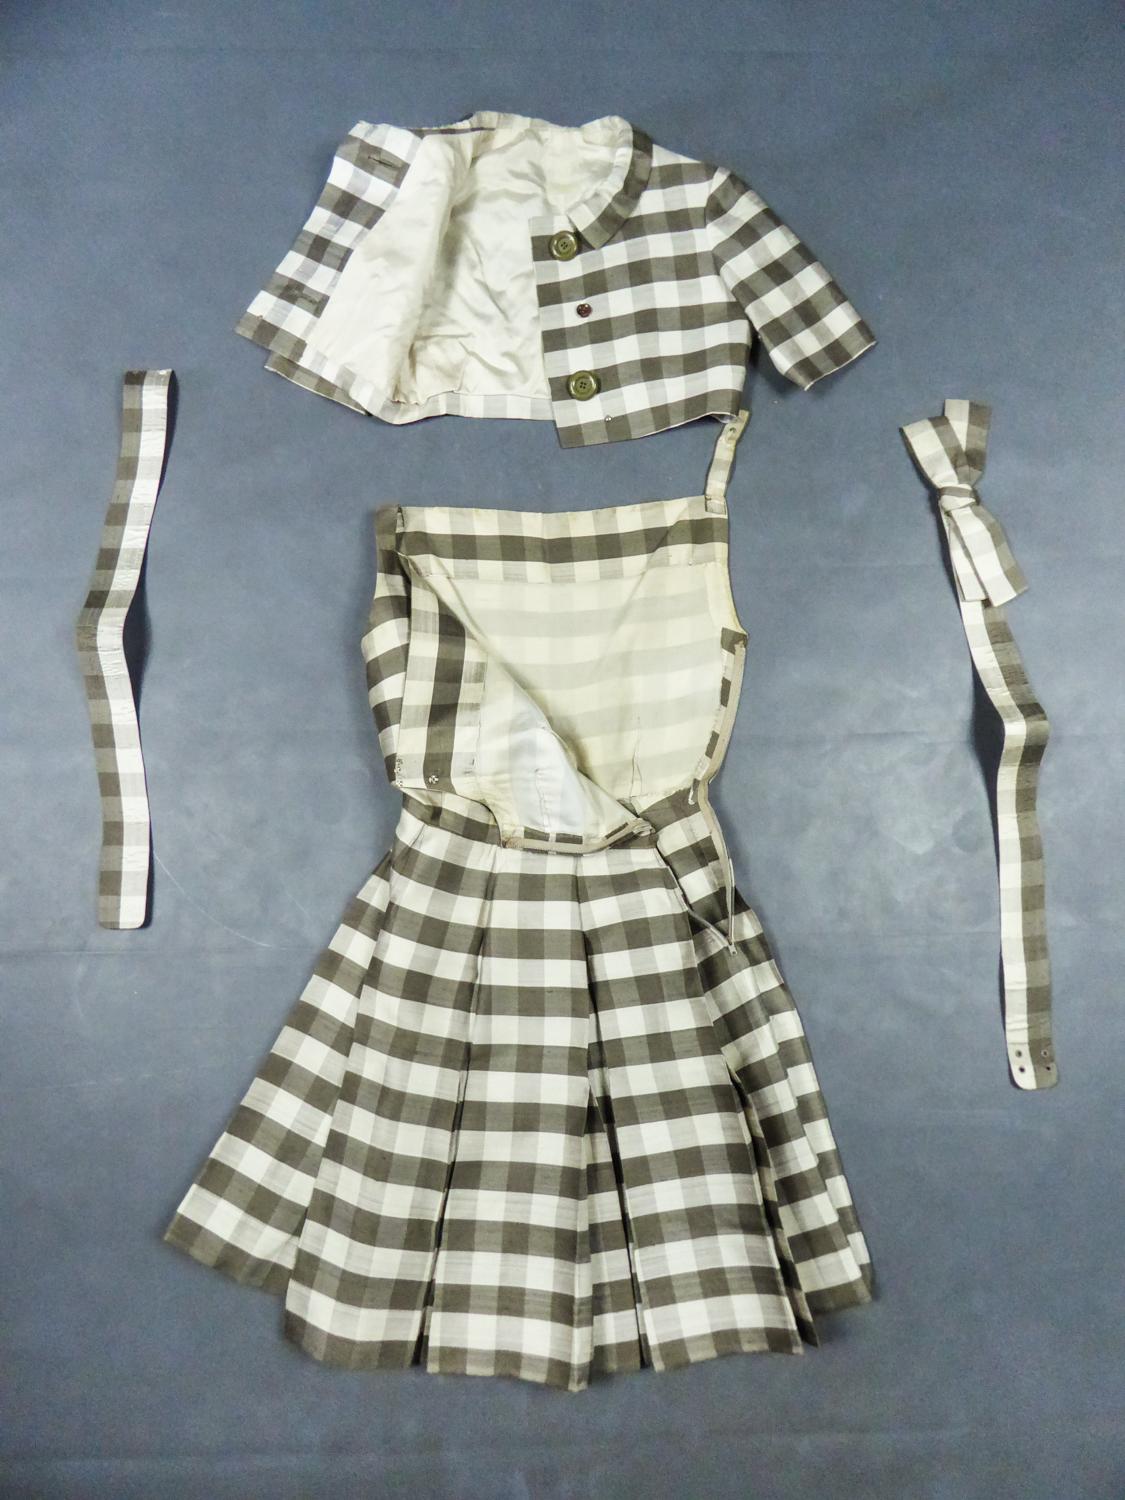 Circa 1959/1962
France Paris

Haute Couture Nina Ricci Dress, Bolero and two belts set dating from the early 1960s. Beautiful wild silk woven with large brown and cream checks. Sleeveless dress flaring from the waist and skirt with double flat box